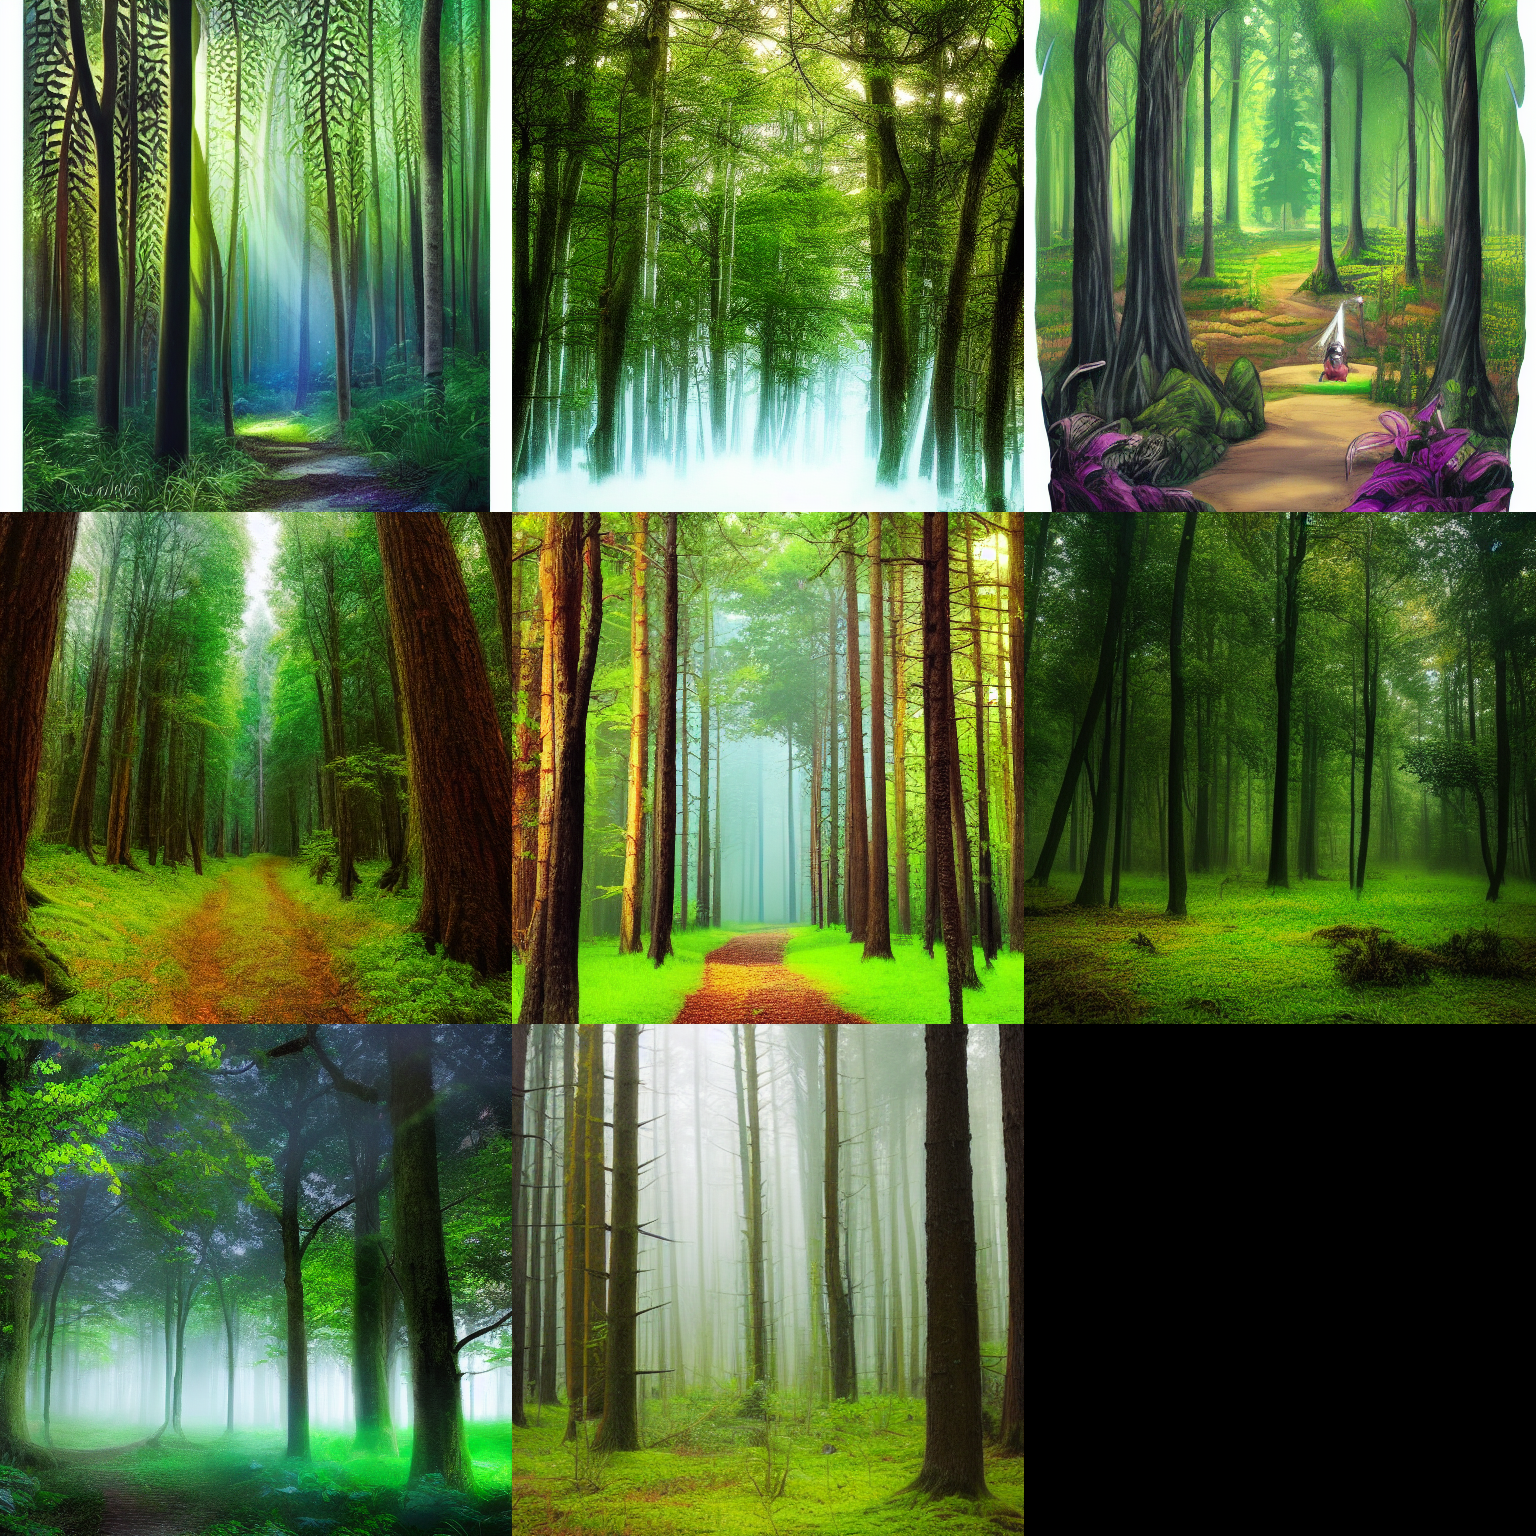 A grid of different forest images.